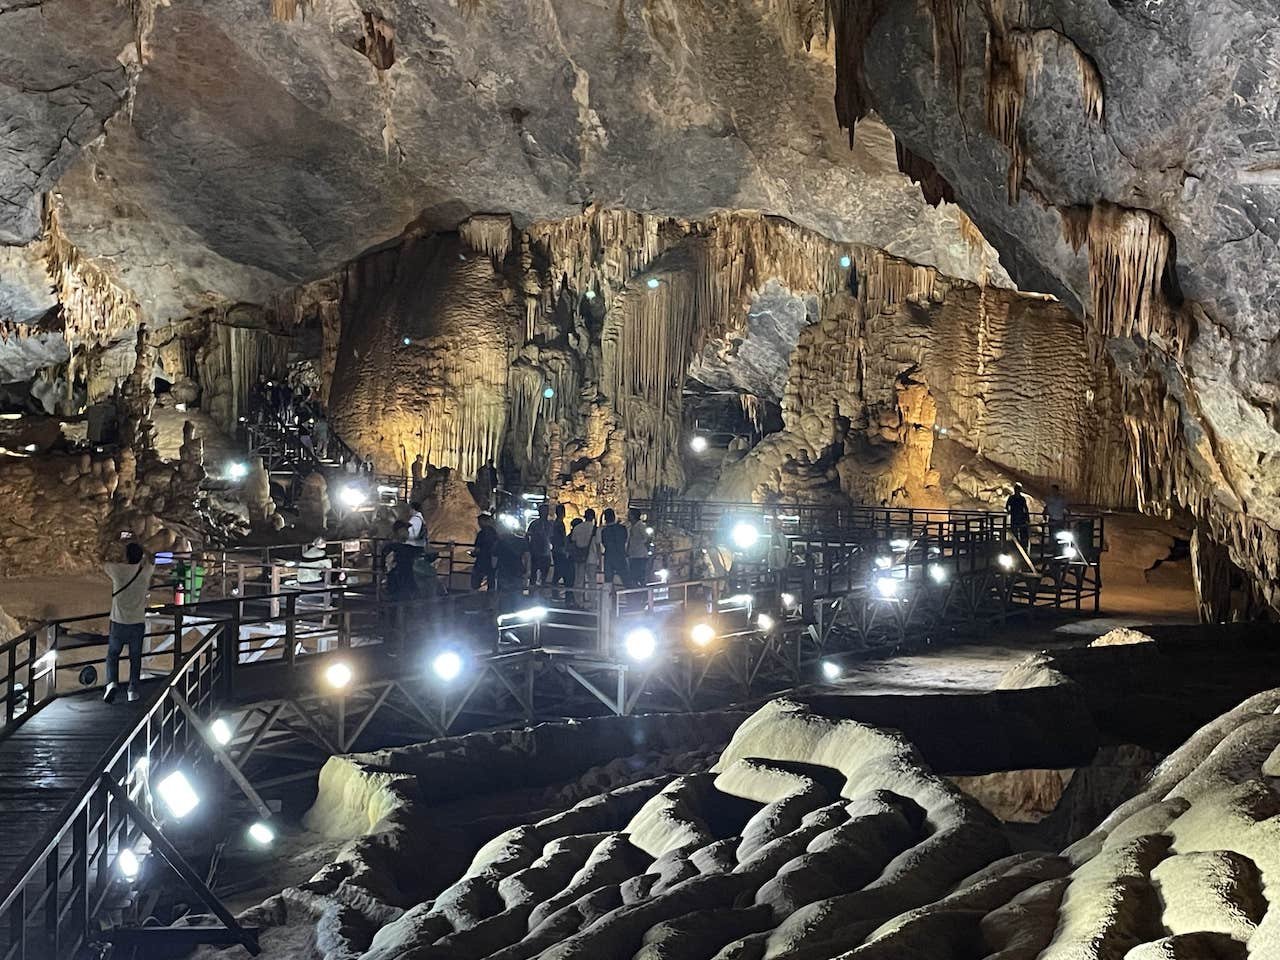 Lighting system in Paradise cave